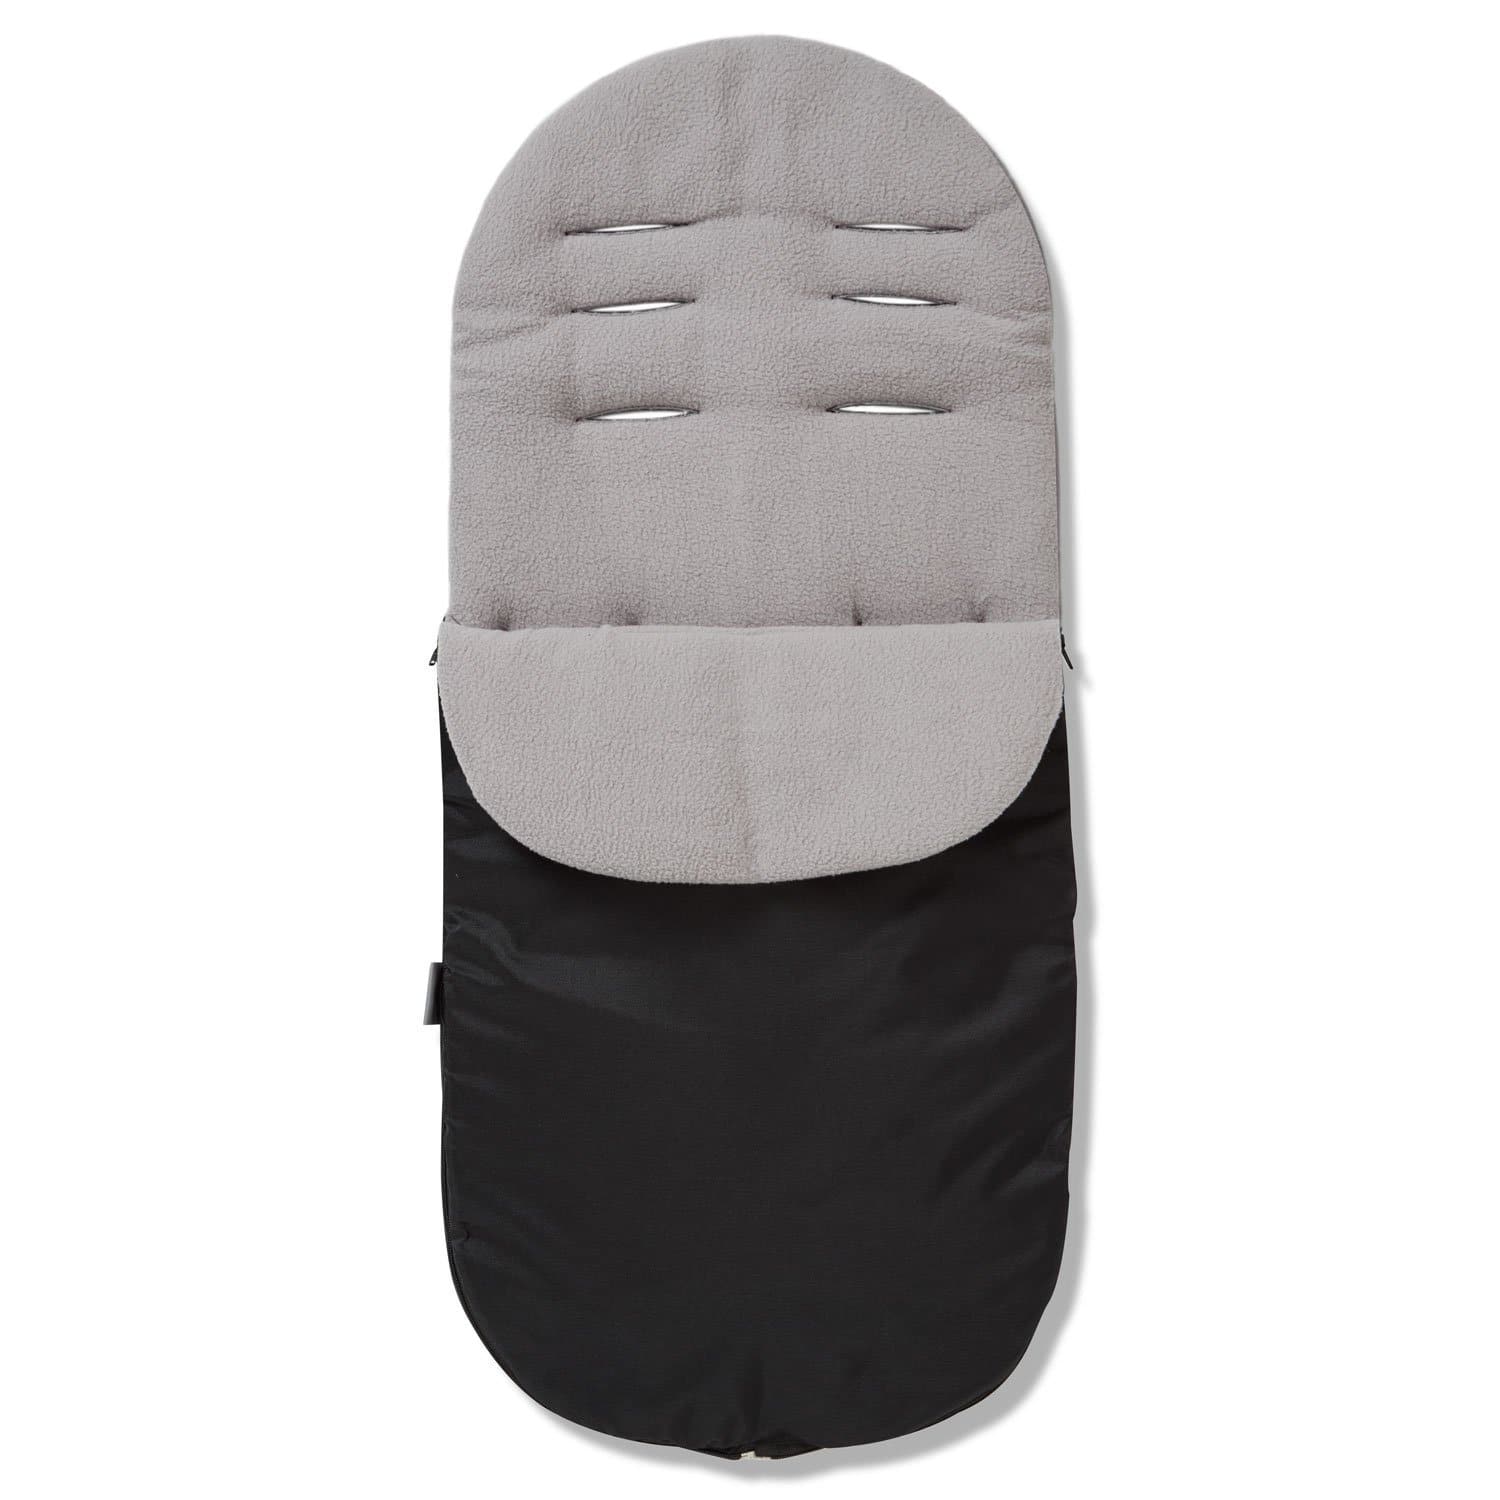 Footmuff / Cosy Toes Compatible with Looping - Grey / Fits All Models | For Your Little One